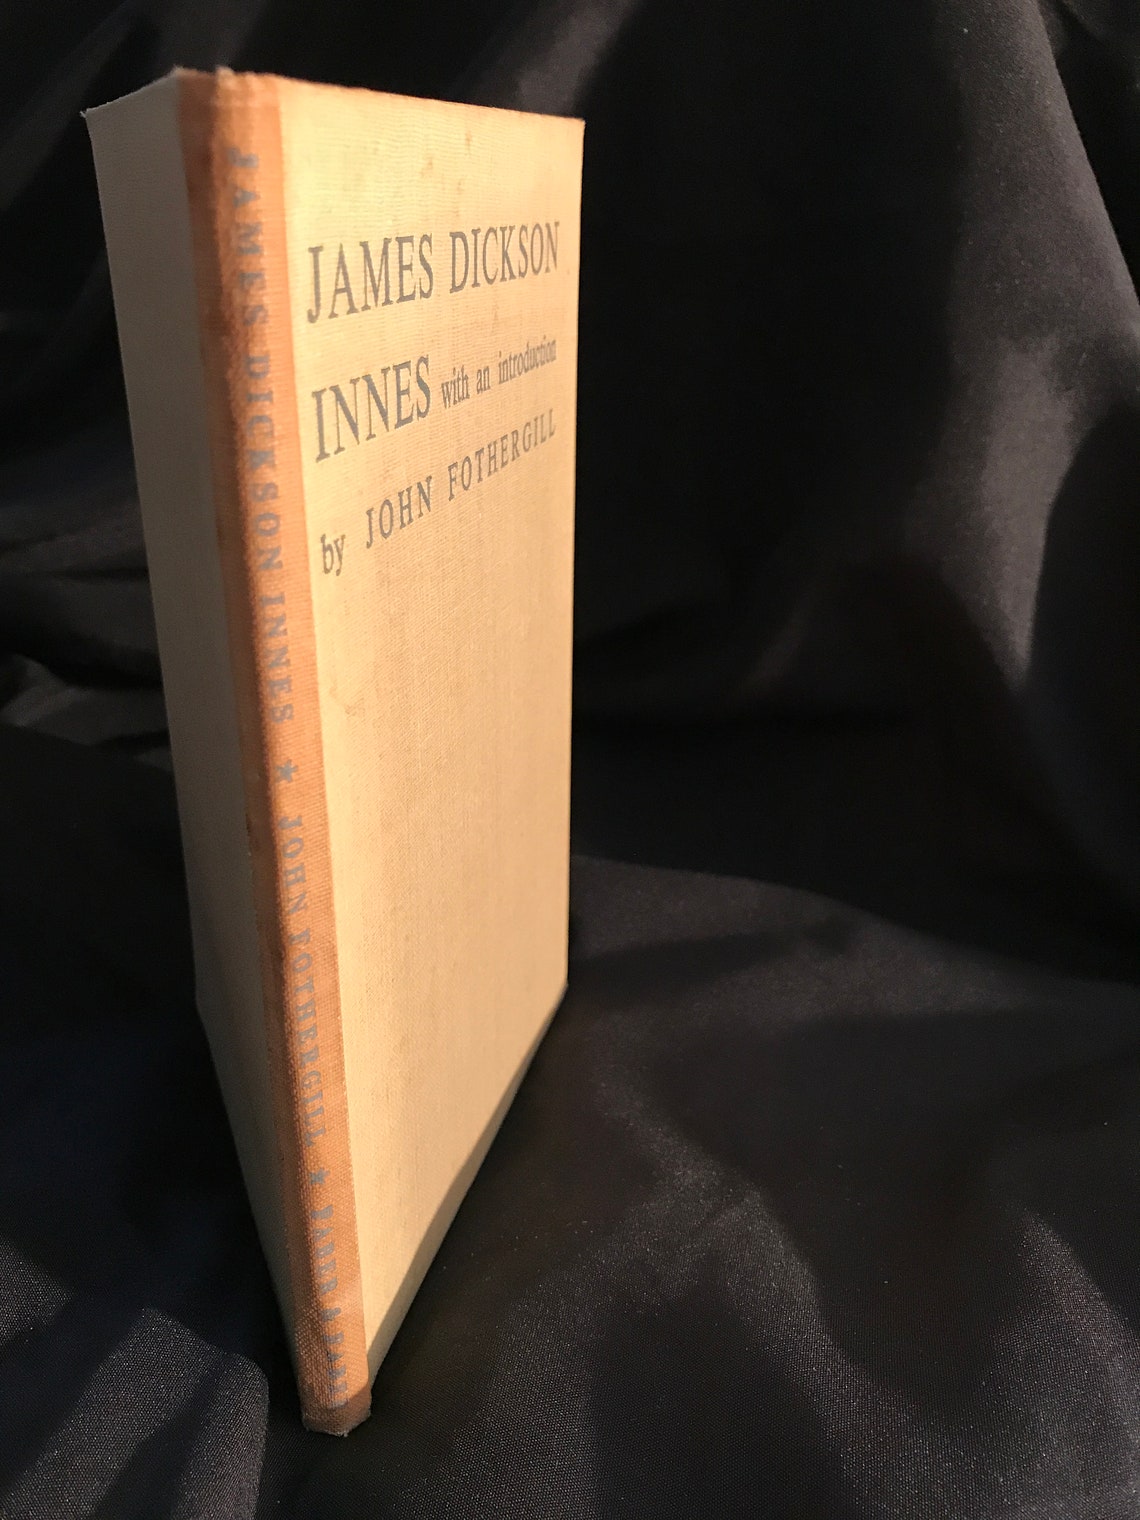 Book James Dickson Innes with an introduction by John | Etsy